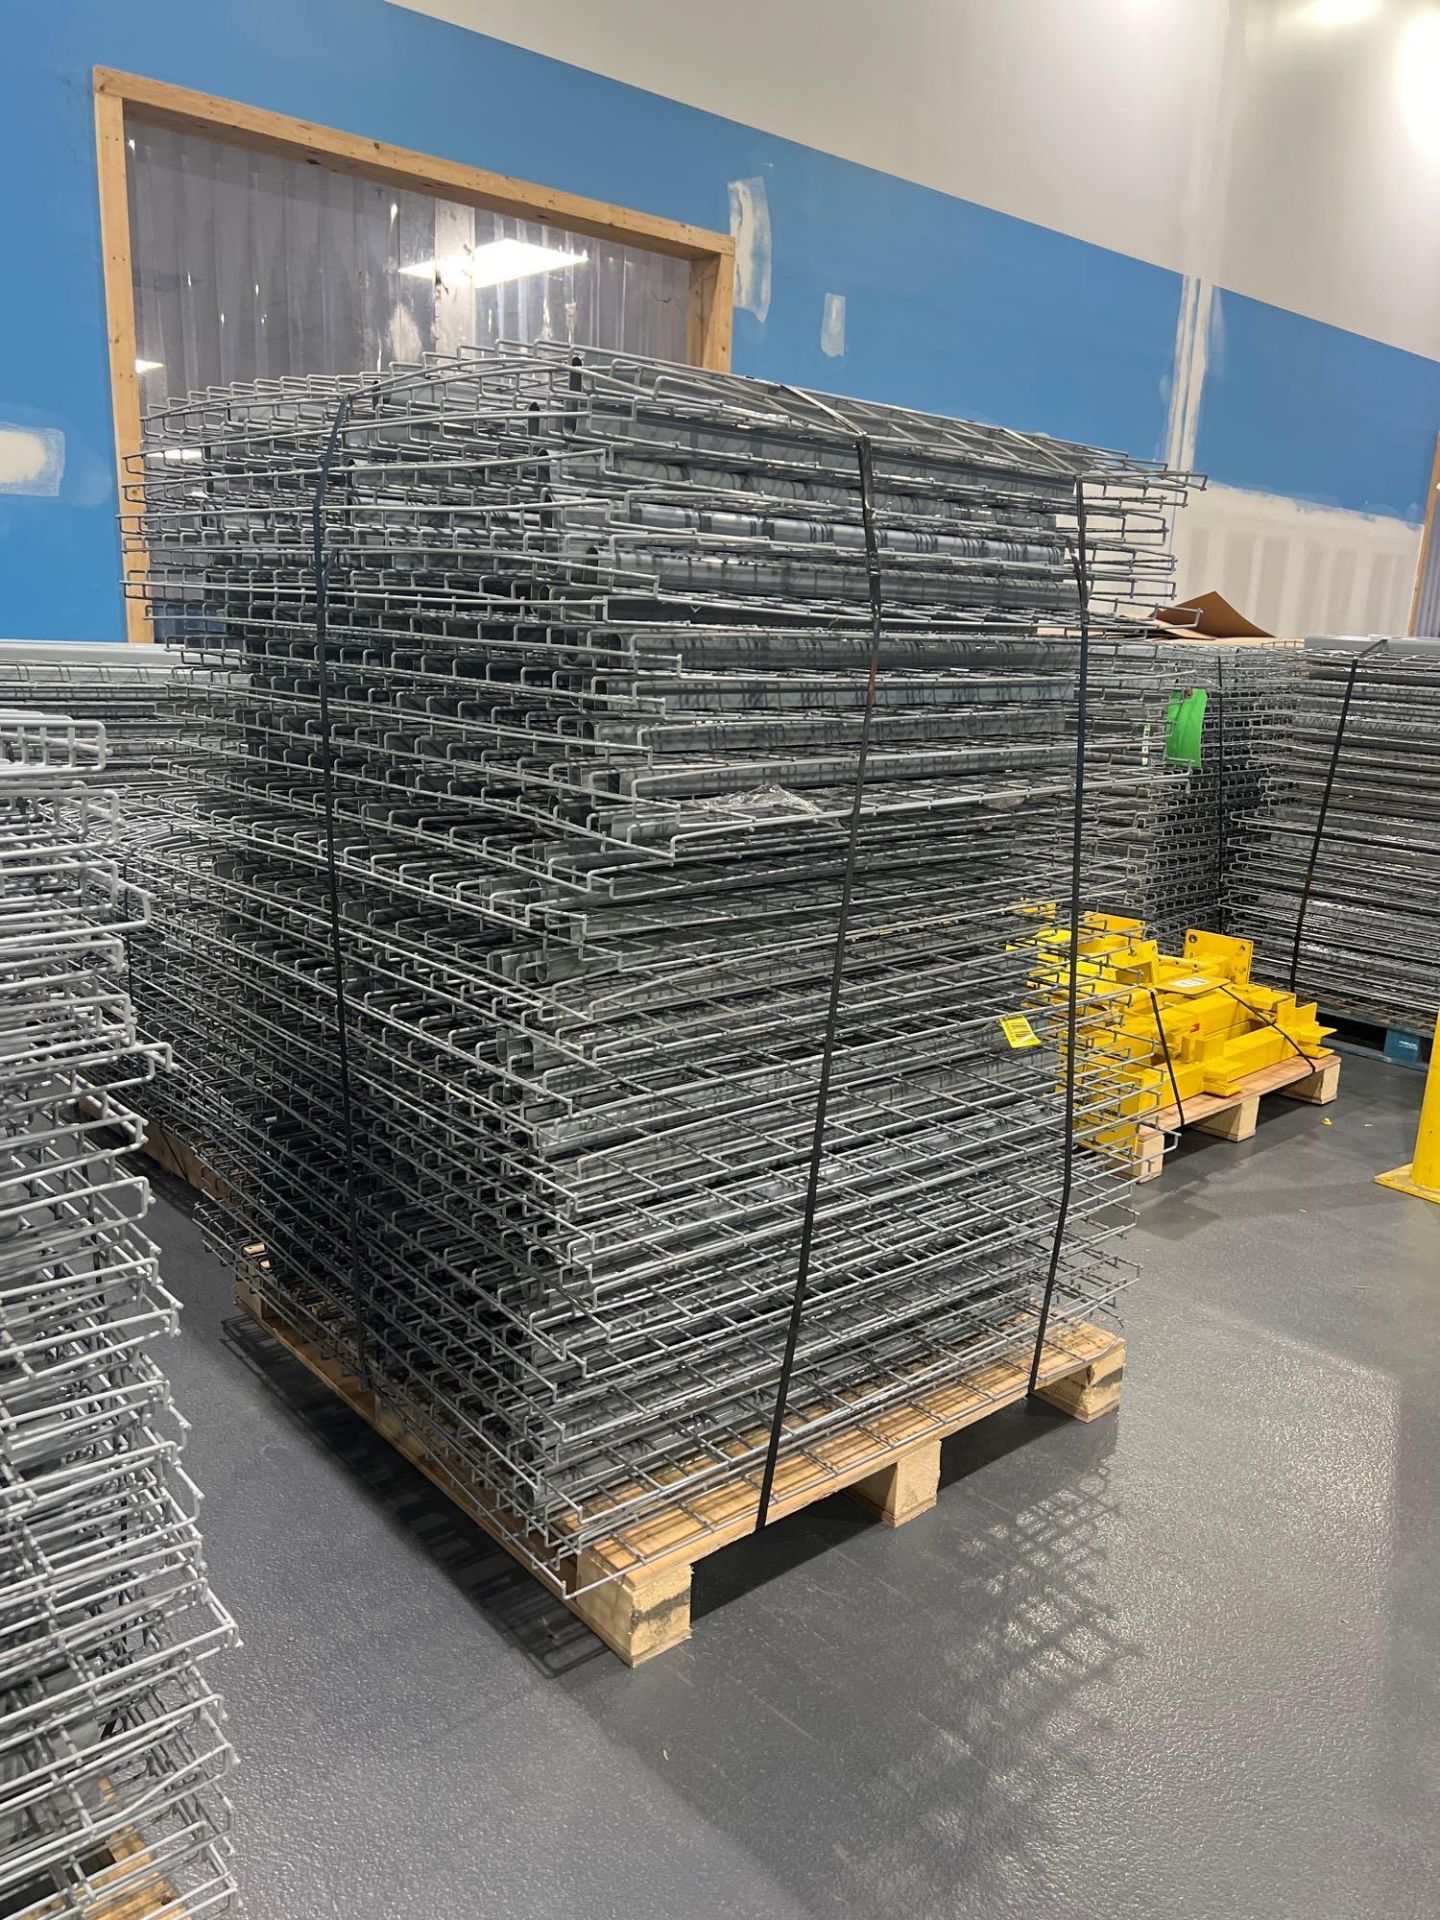 PALLET OF APPROX. 55 WIRE GRATES FOR PALLET RACKING, APPROX. DIMENSIONS 43" X 45" - Image 3 of 4